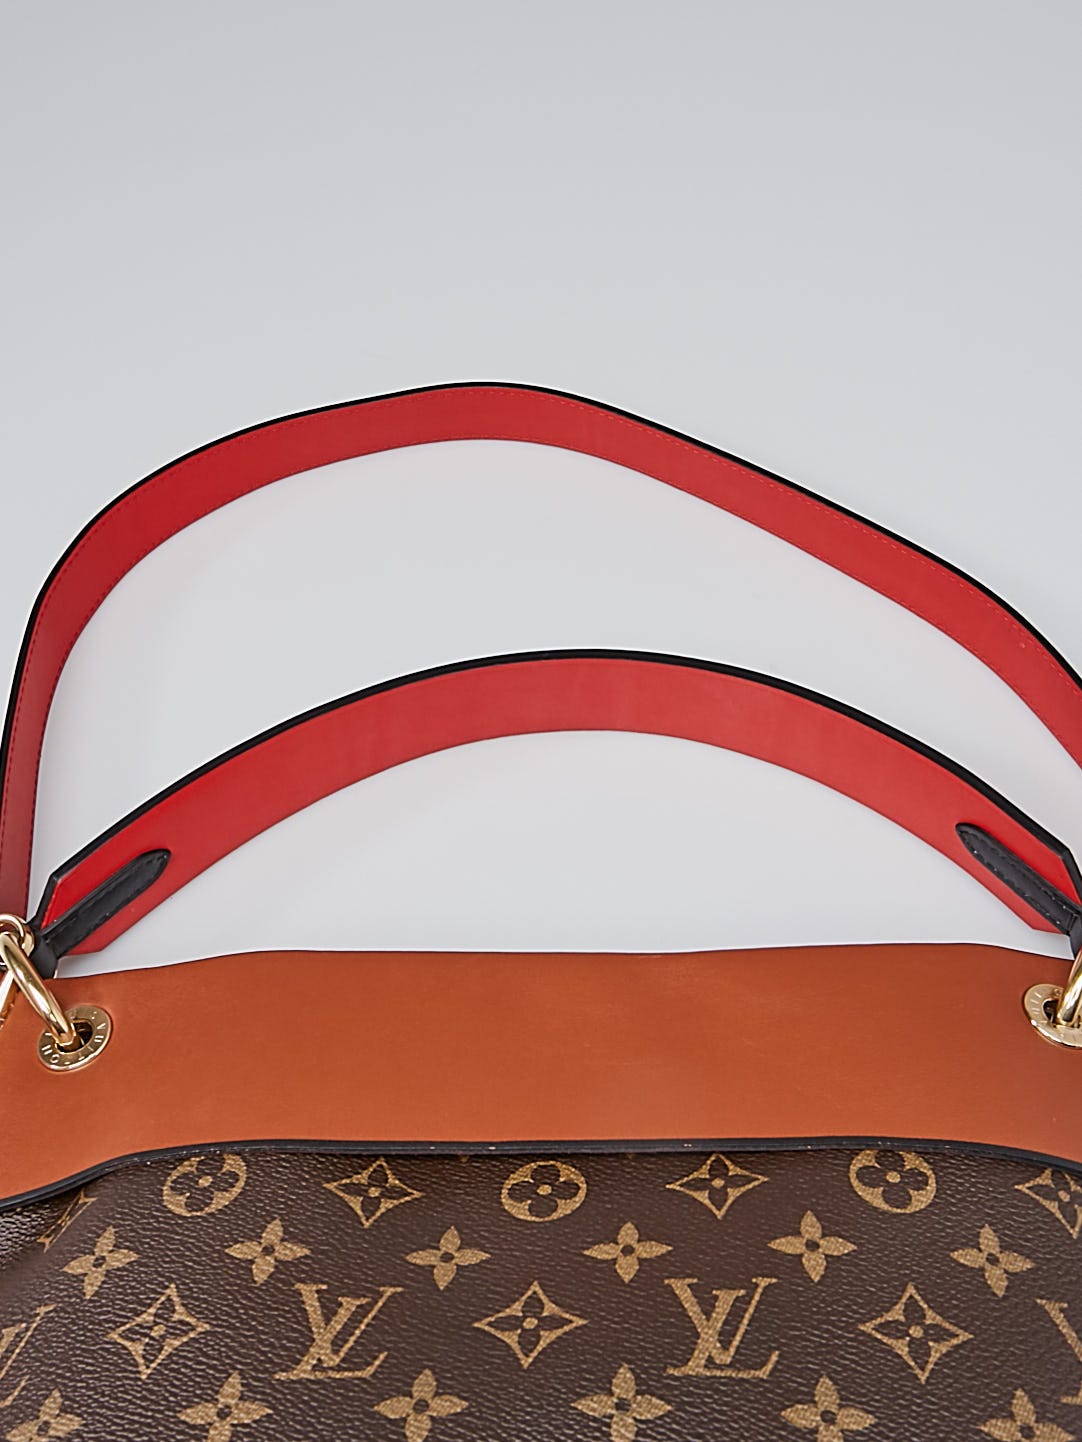 Gorgeous Authentic Louis Vuitton Tuileries Besace Carmel Red Hobo Tote Bag